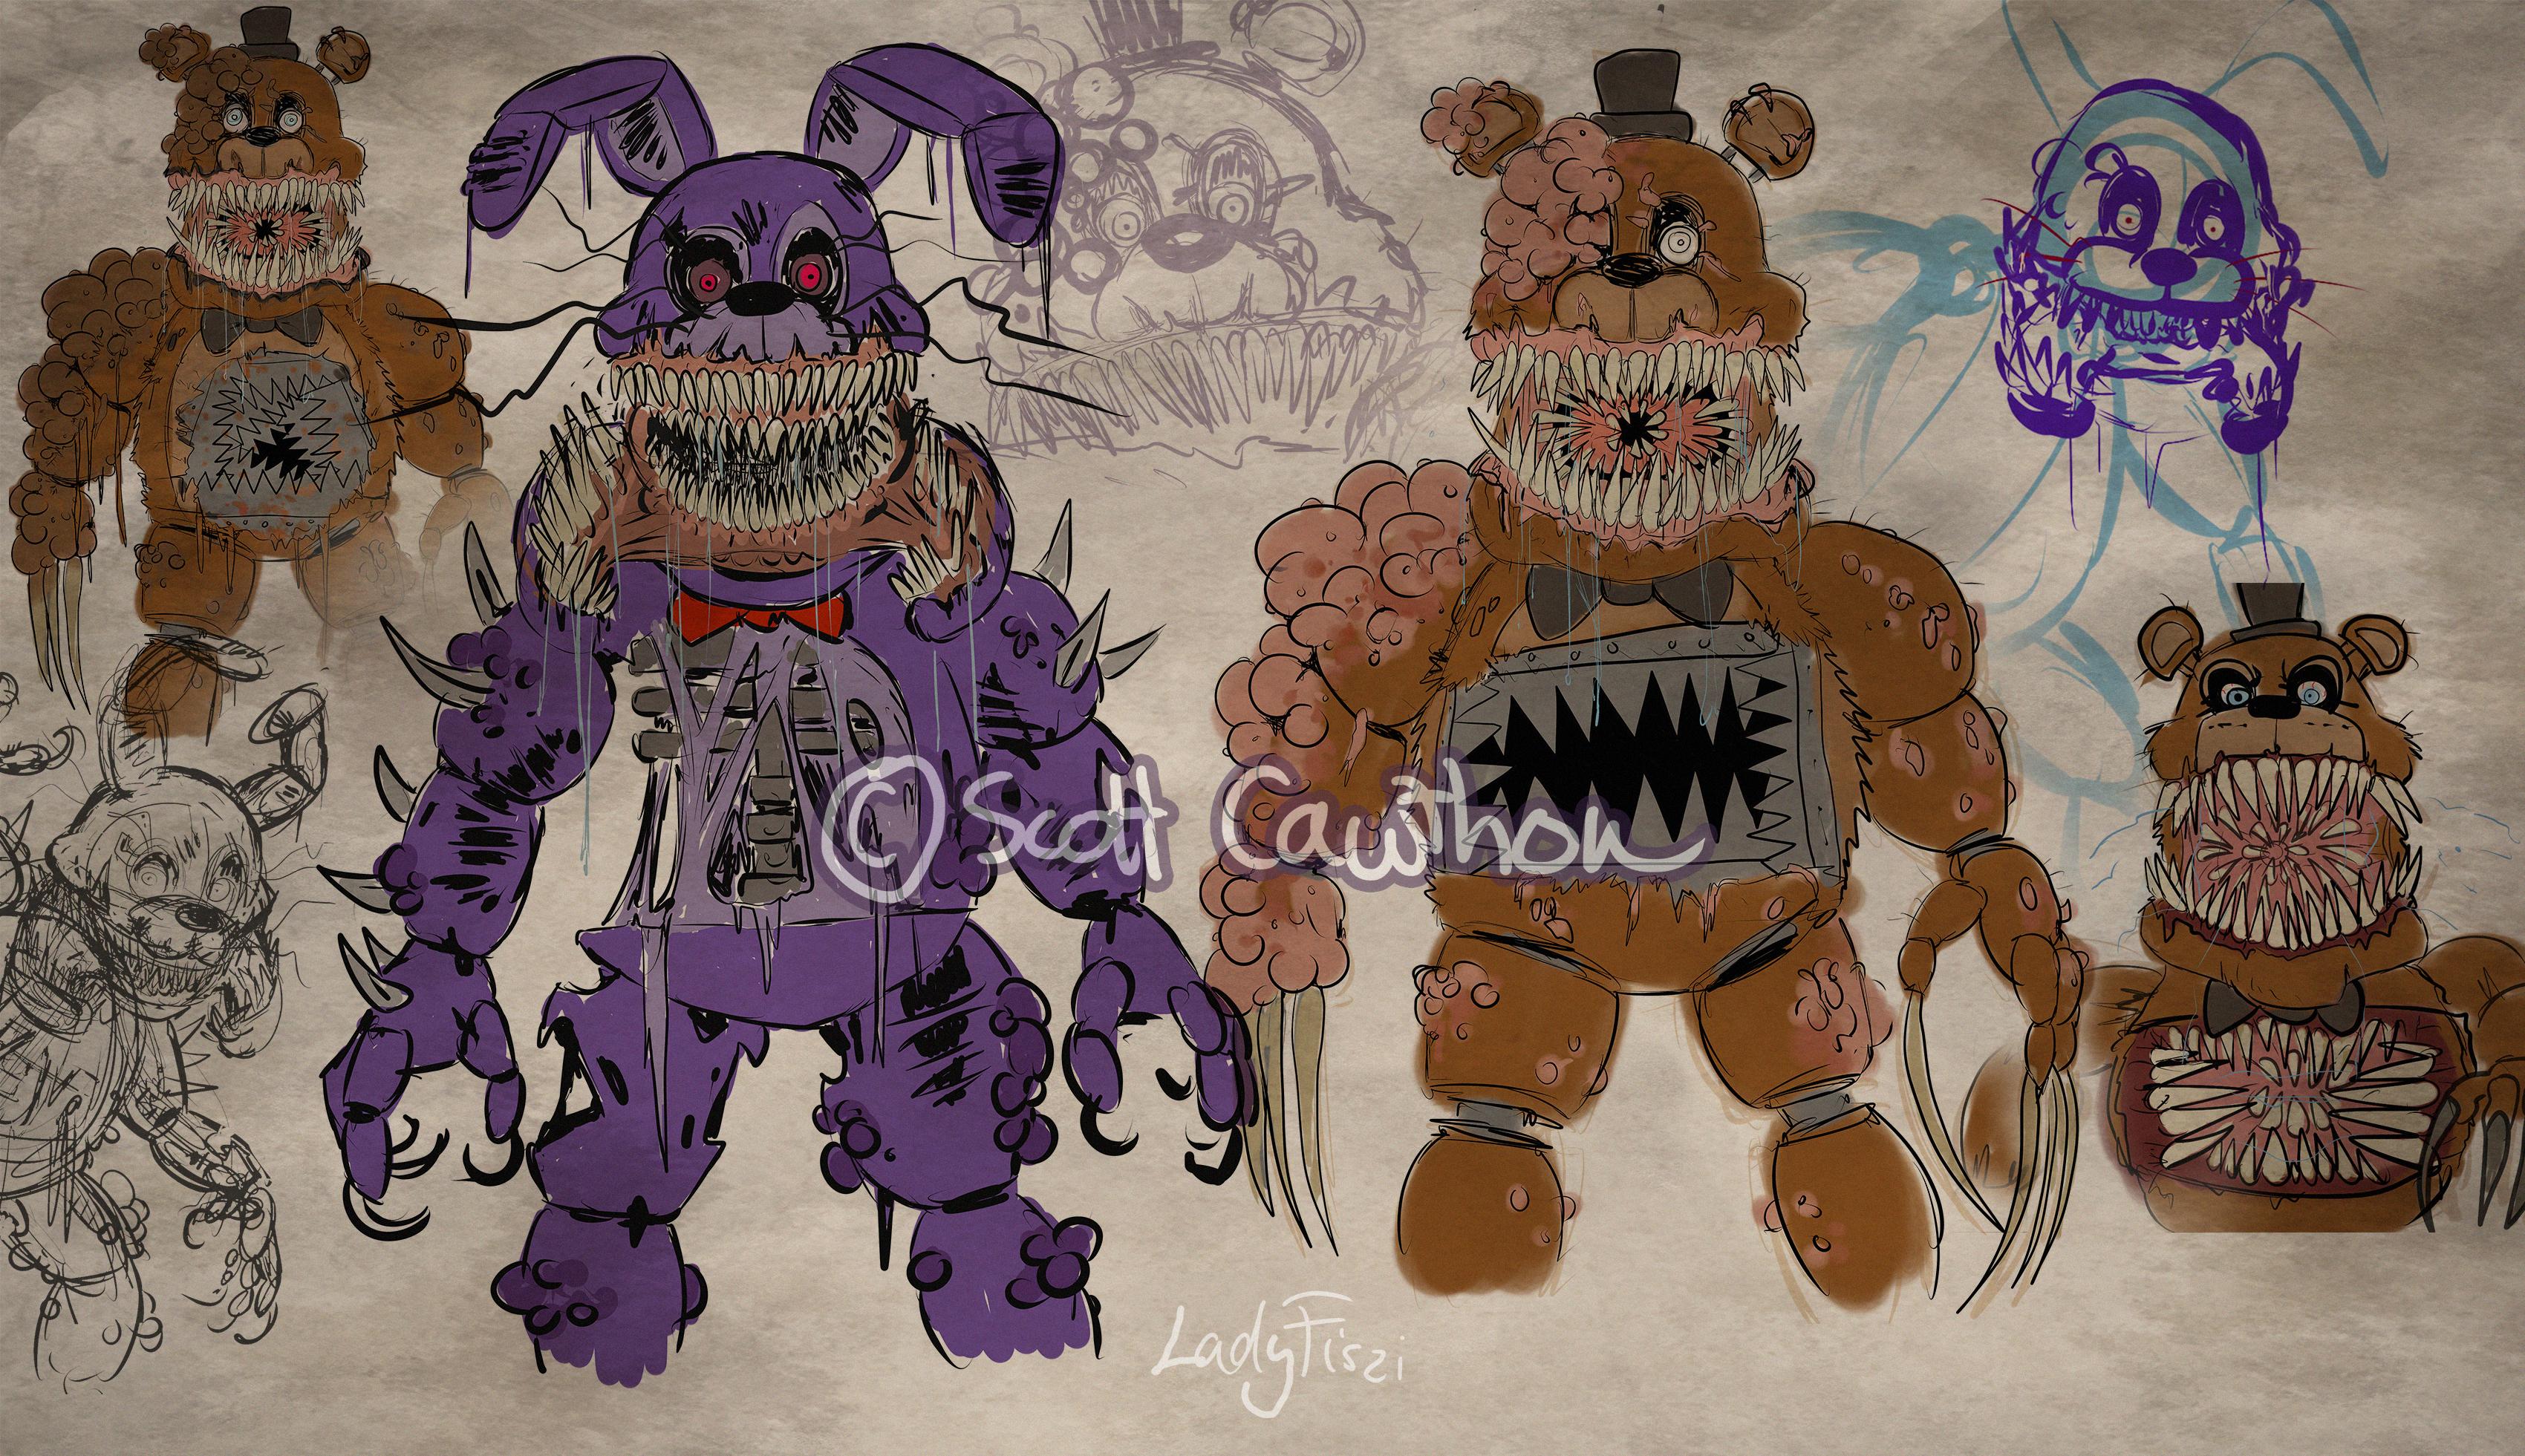 fnaf the twisted ones summary